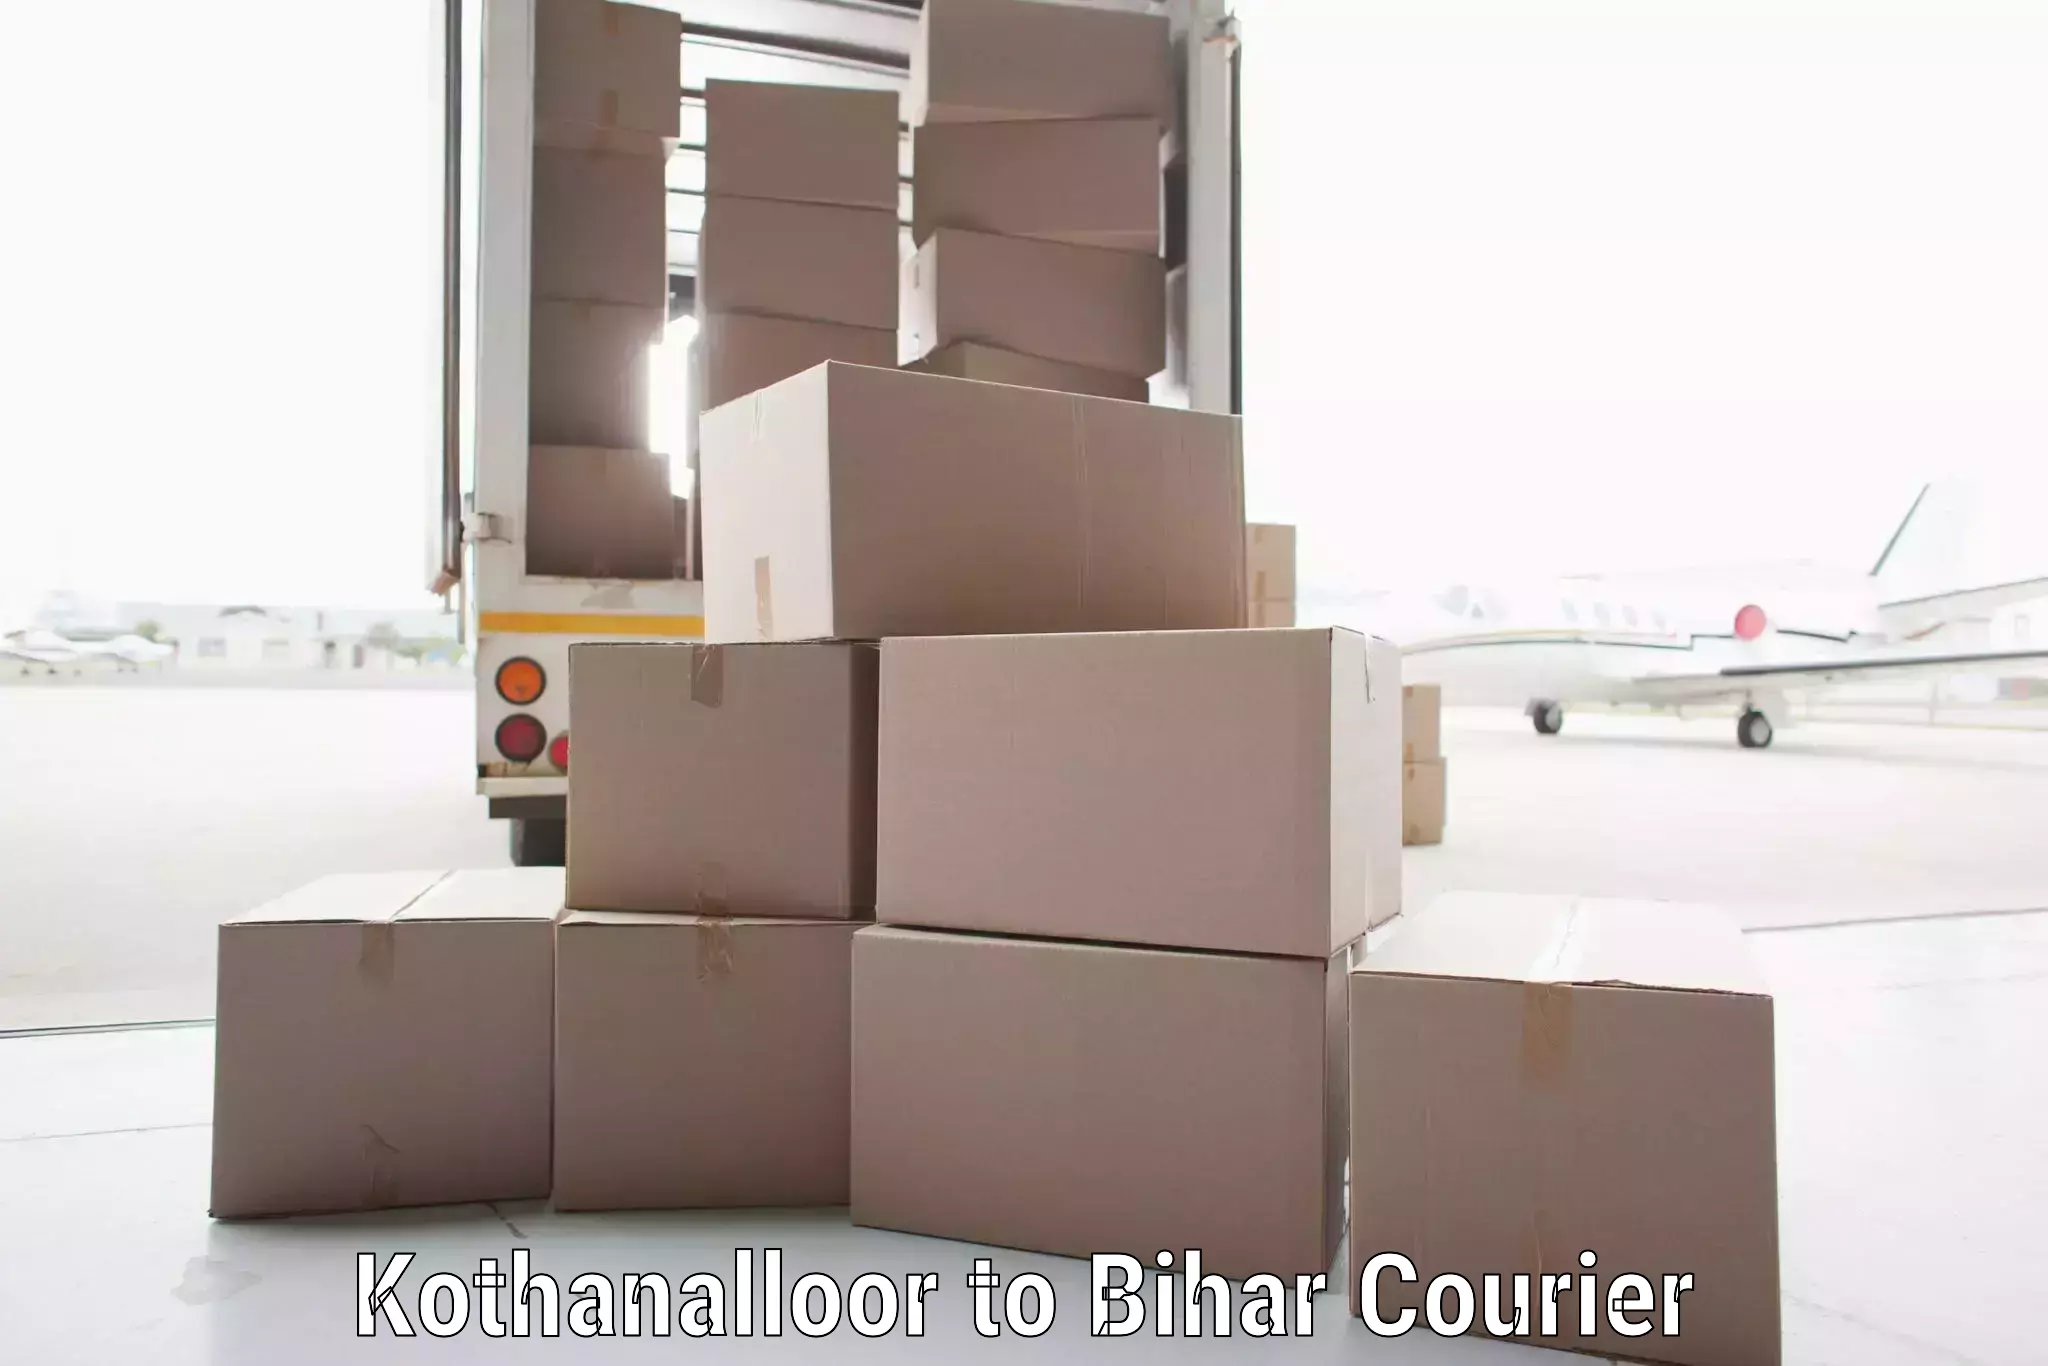 Small business couriers Kothanalloor to Jagdishpur Bhojpur